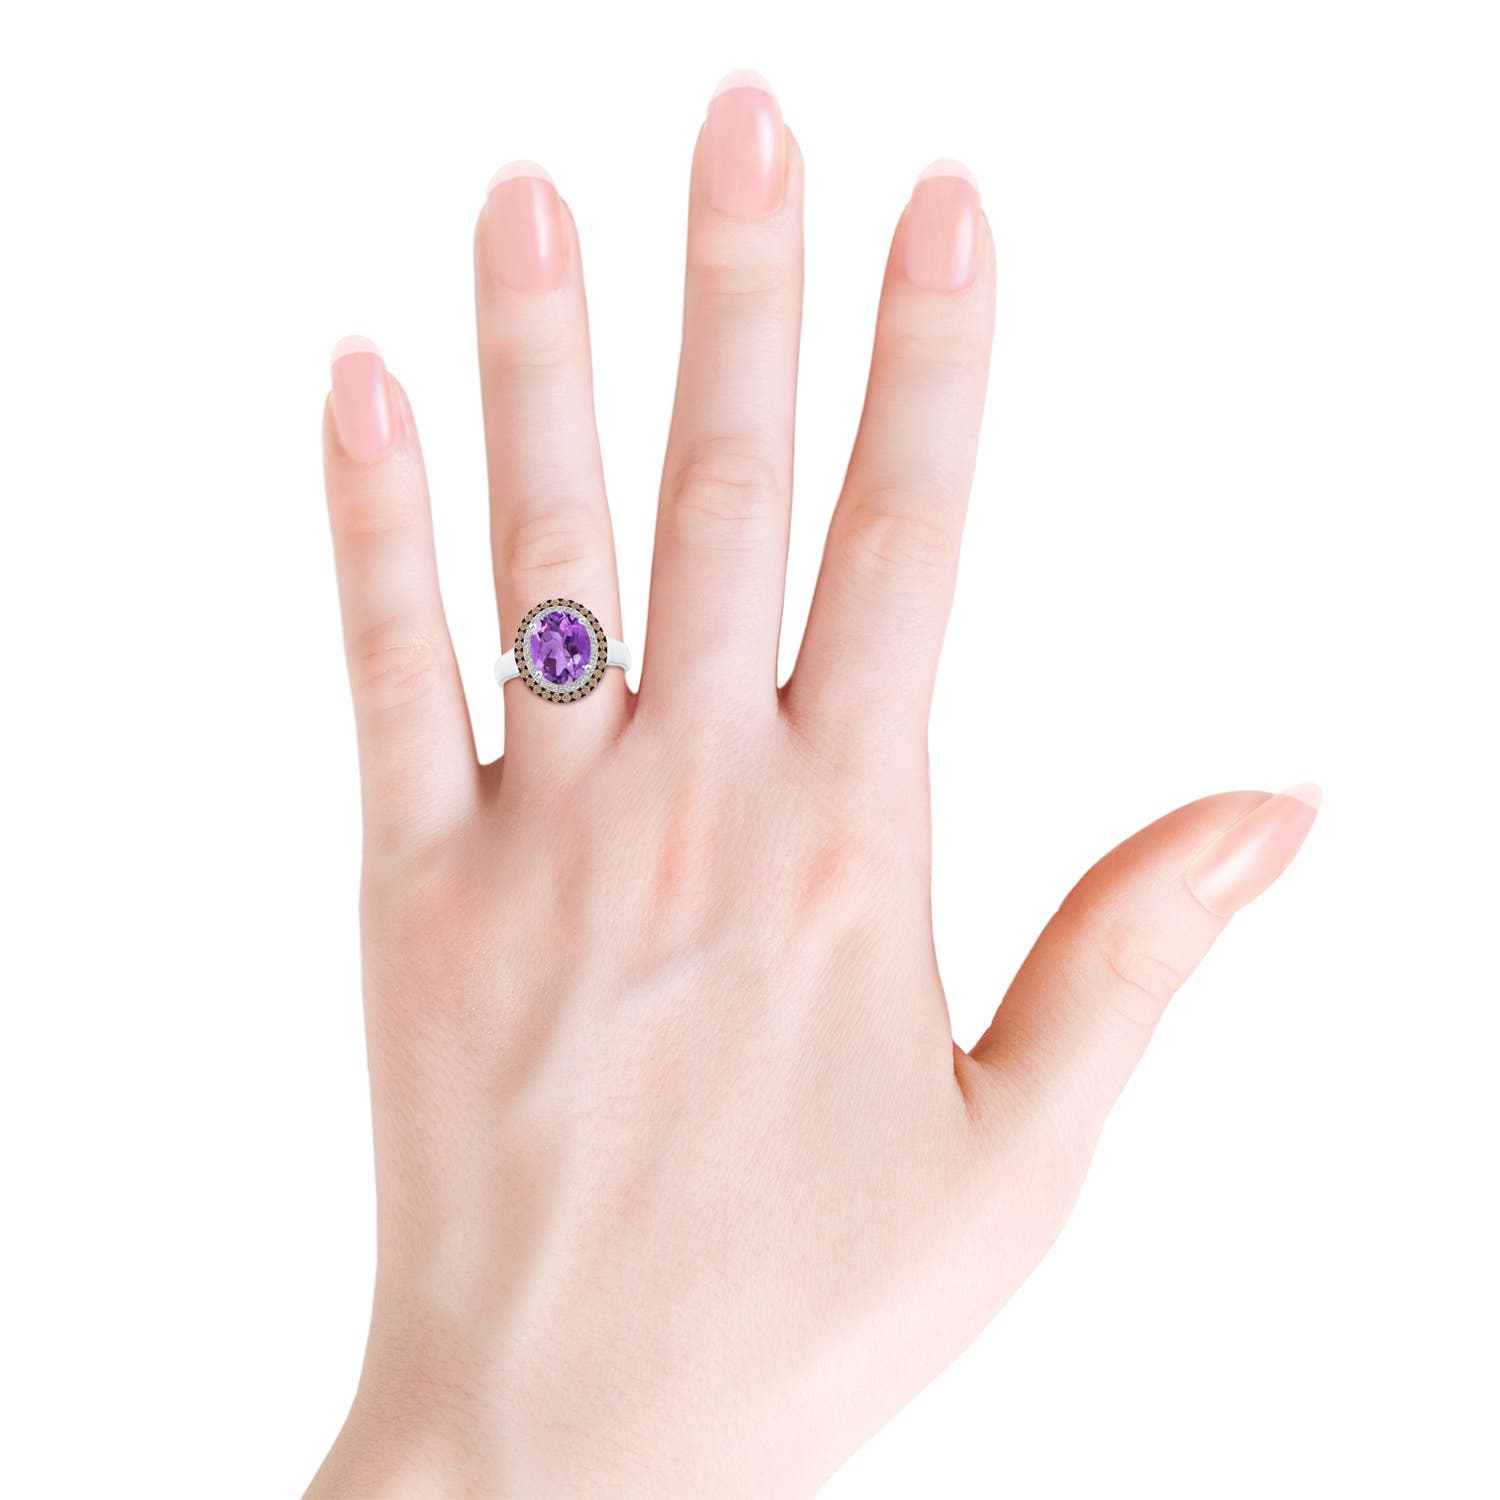 AA - Amethyst / 2.7 CT / 14 KT White Gold